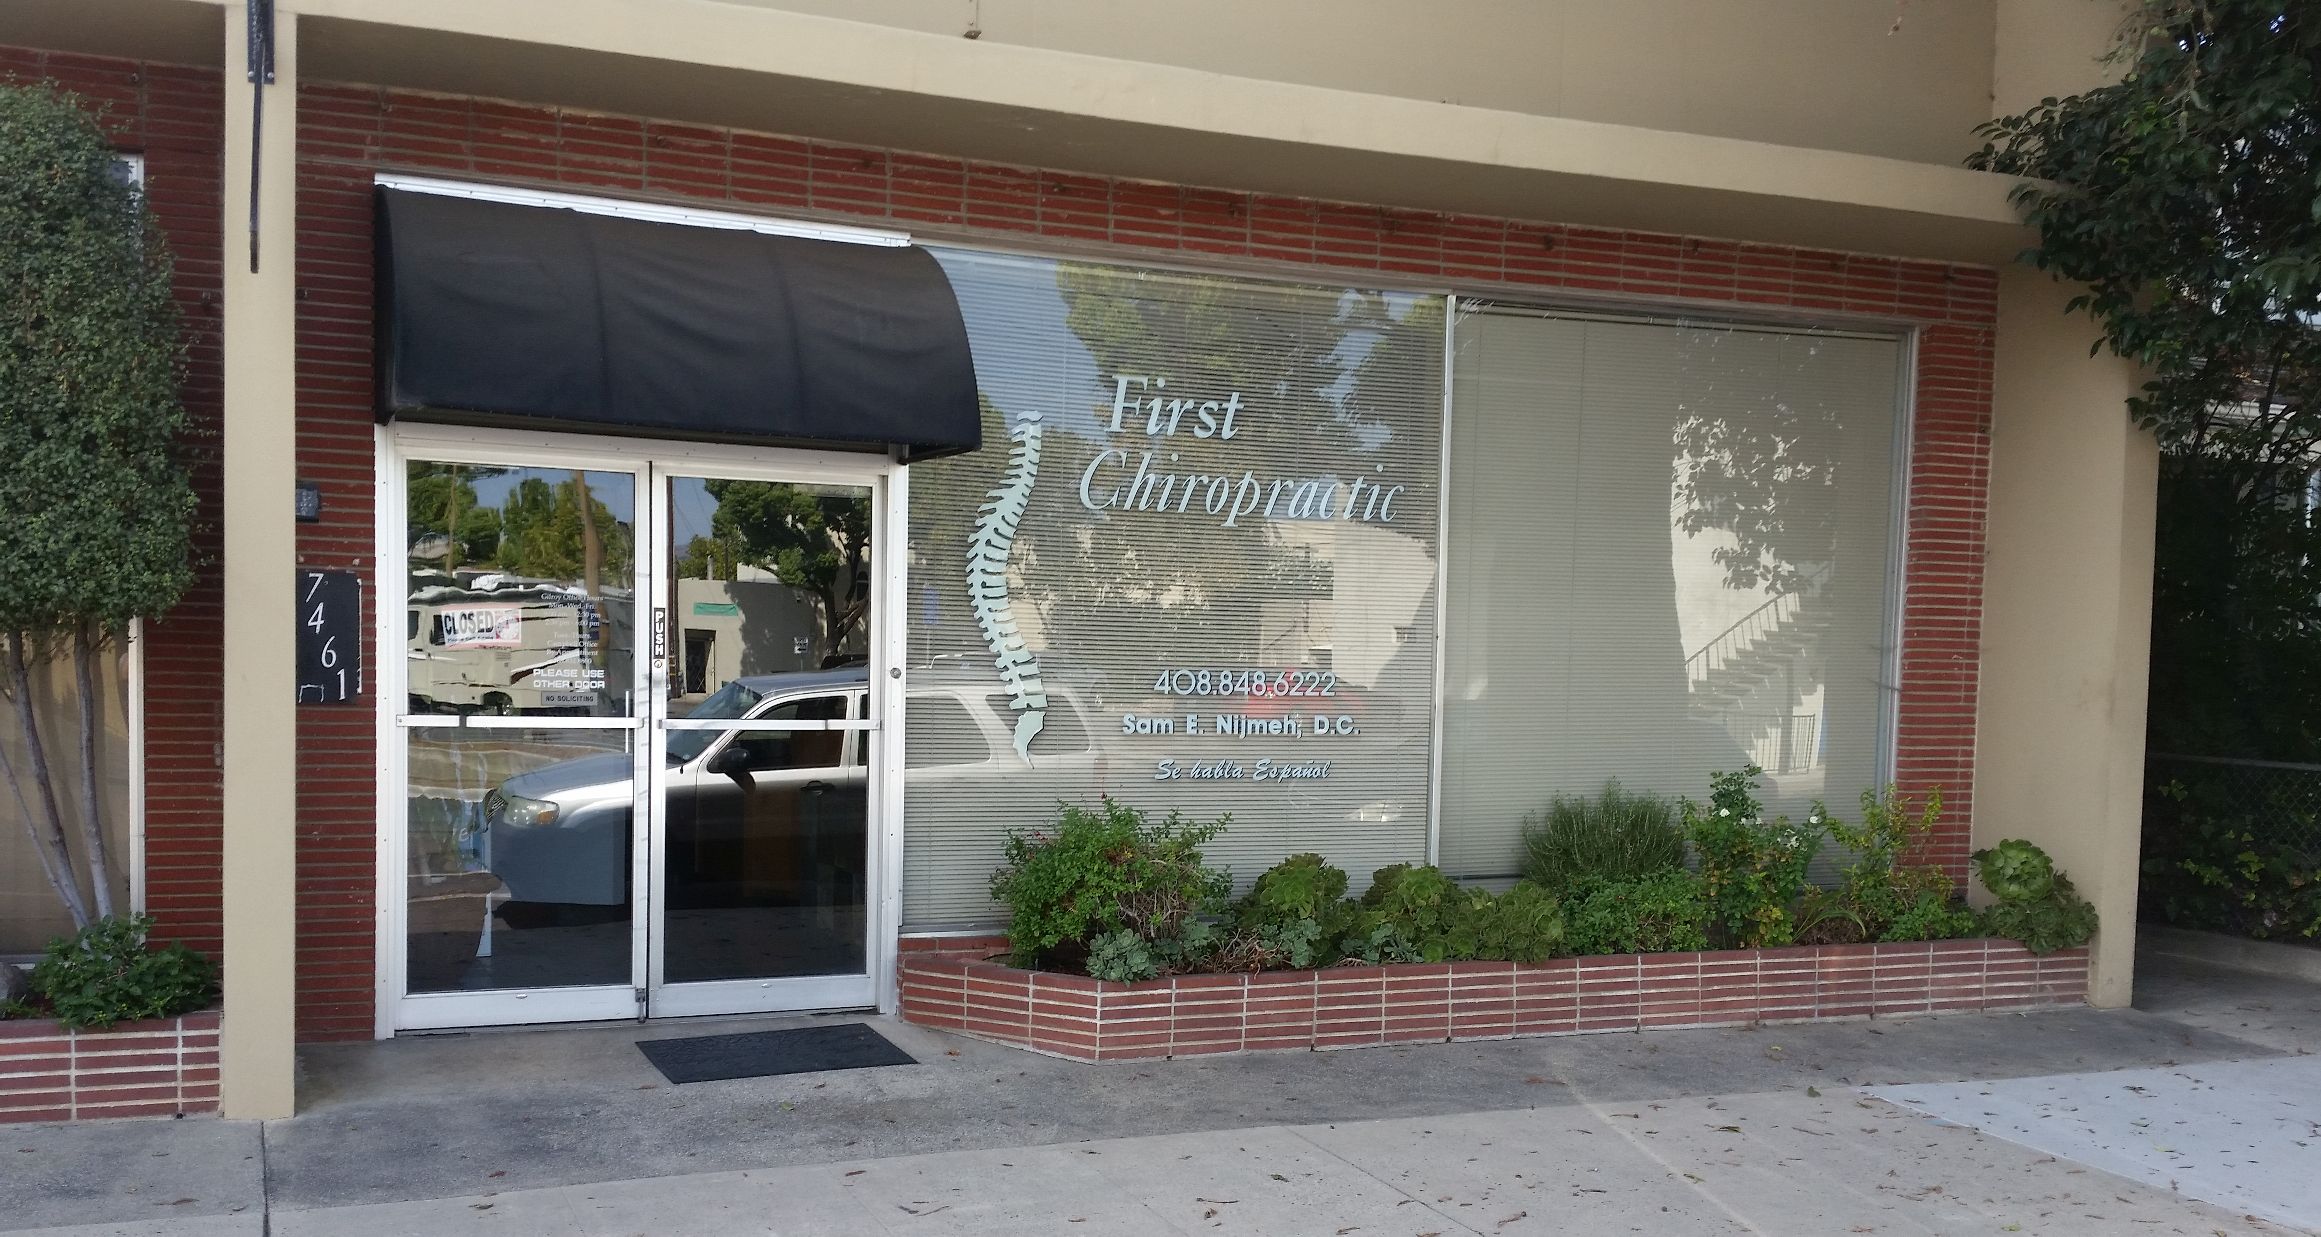 First Chiropractic – Gilroy, CA 408.848.6222 – office entrance-3